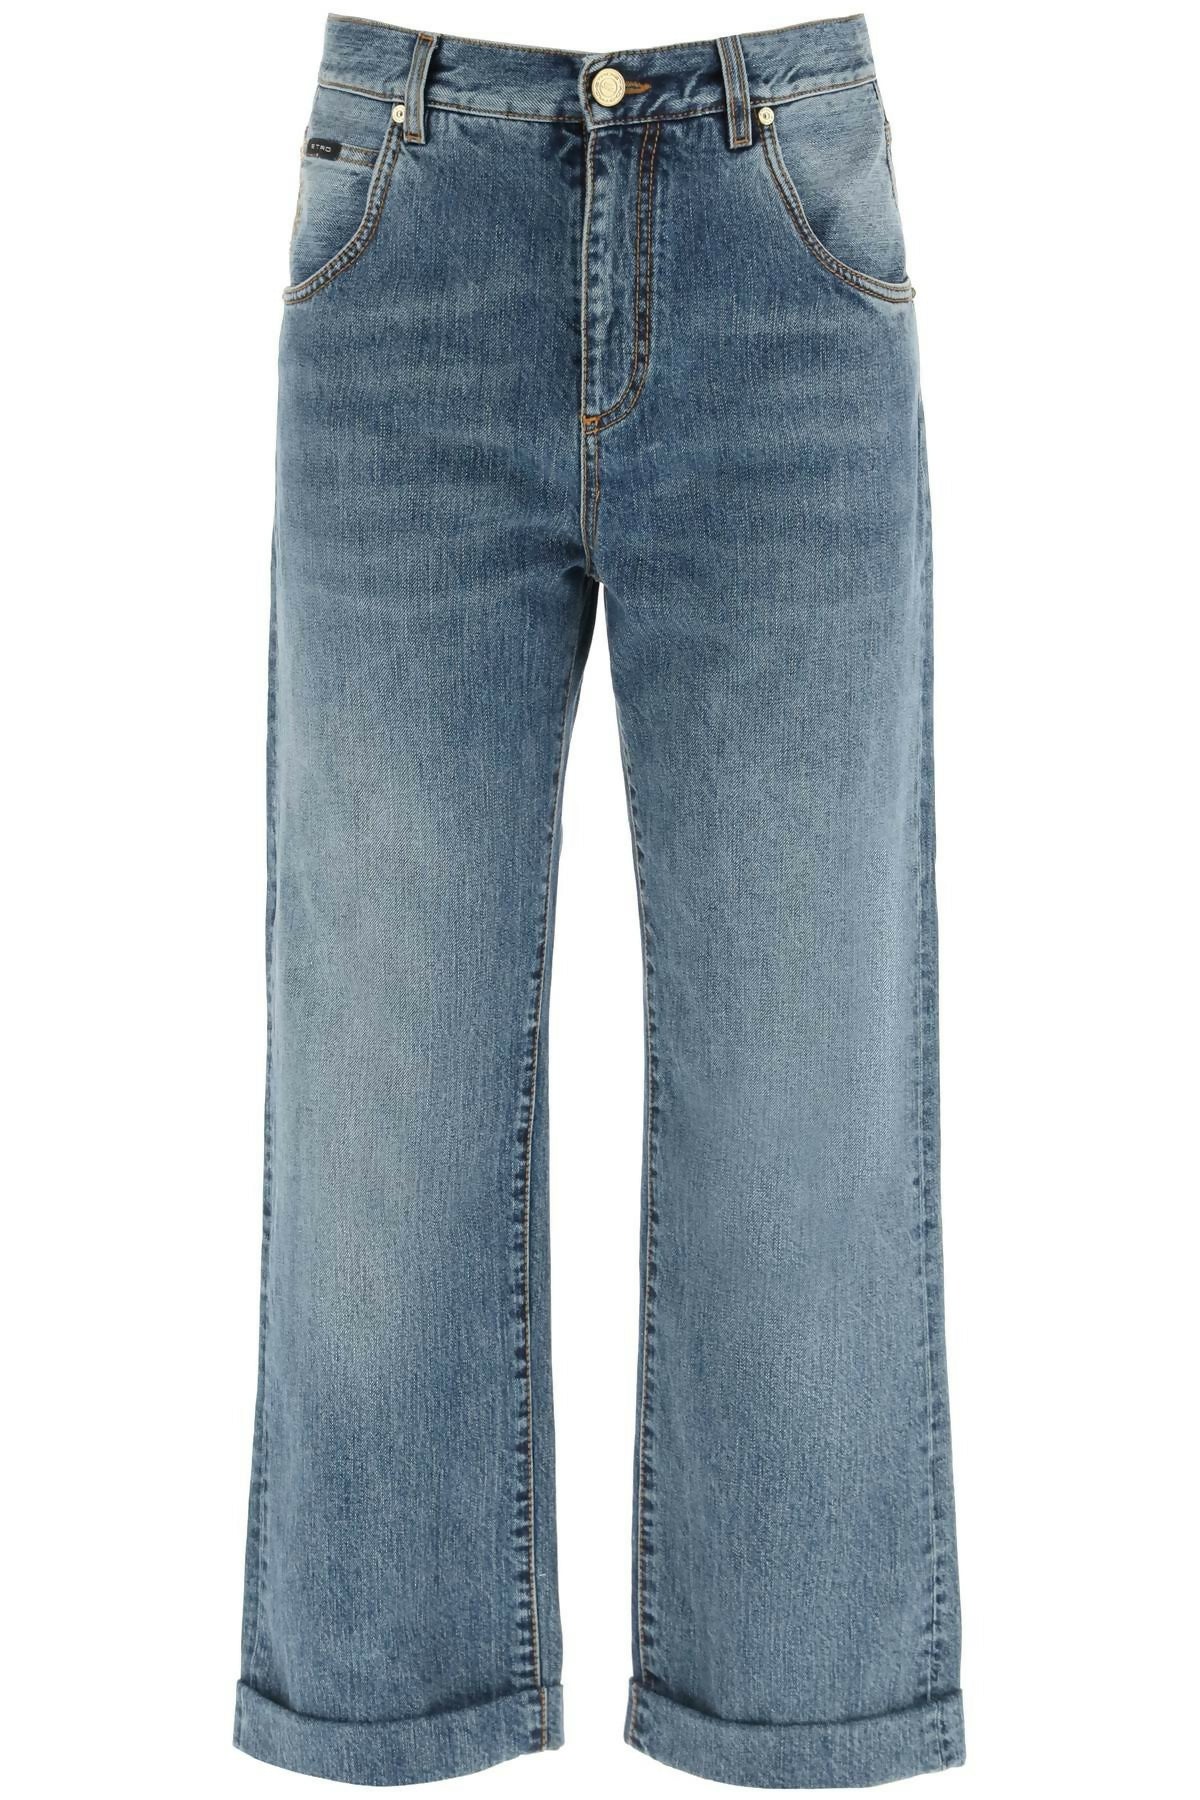 Etro, Easy Fit Jeans